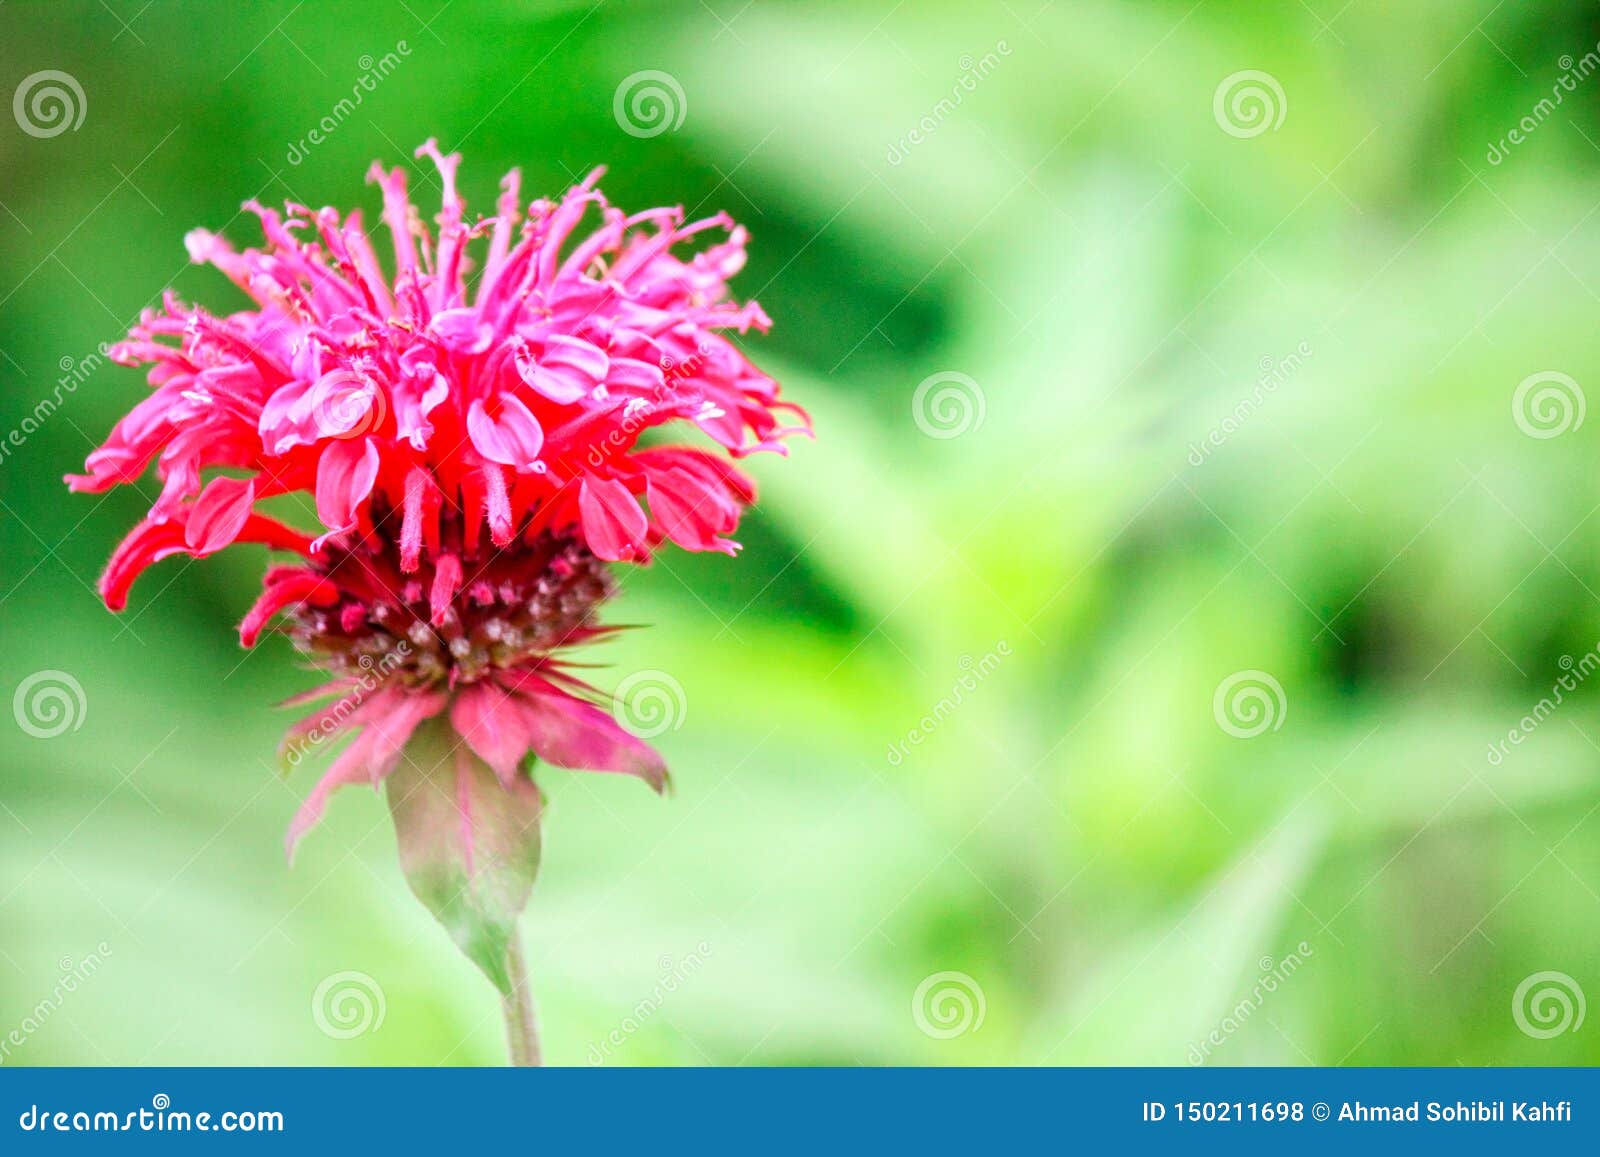 close up of beautiful red pink color flower around green leaves in a garden